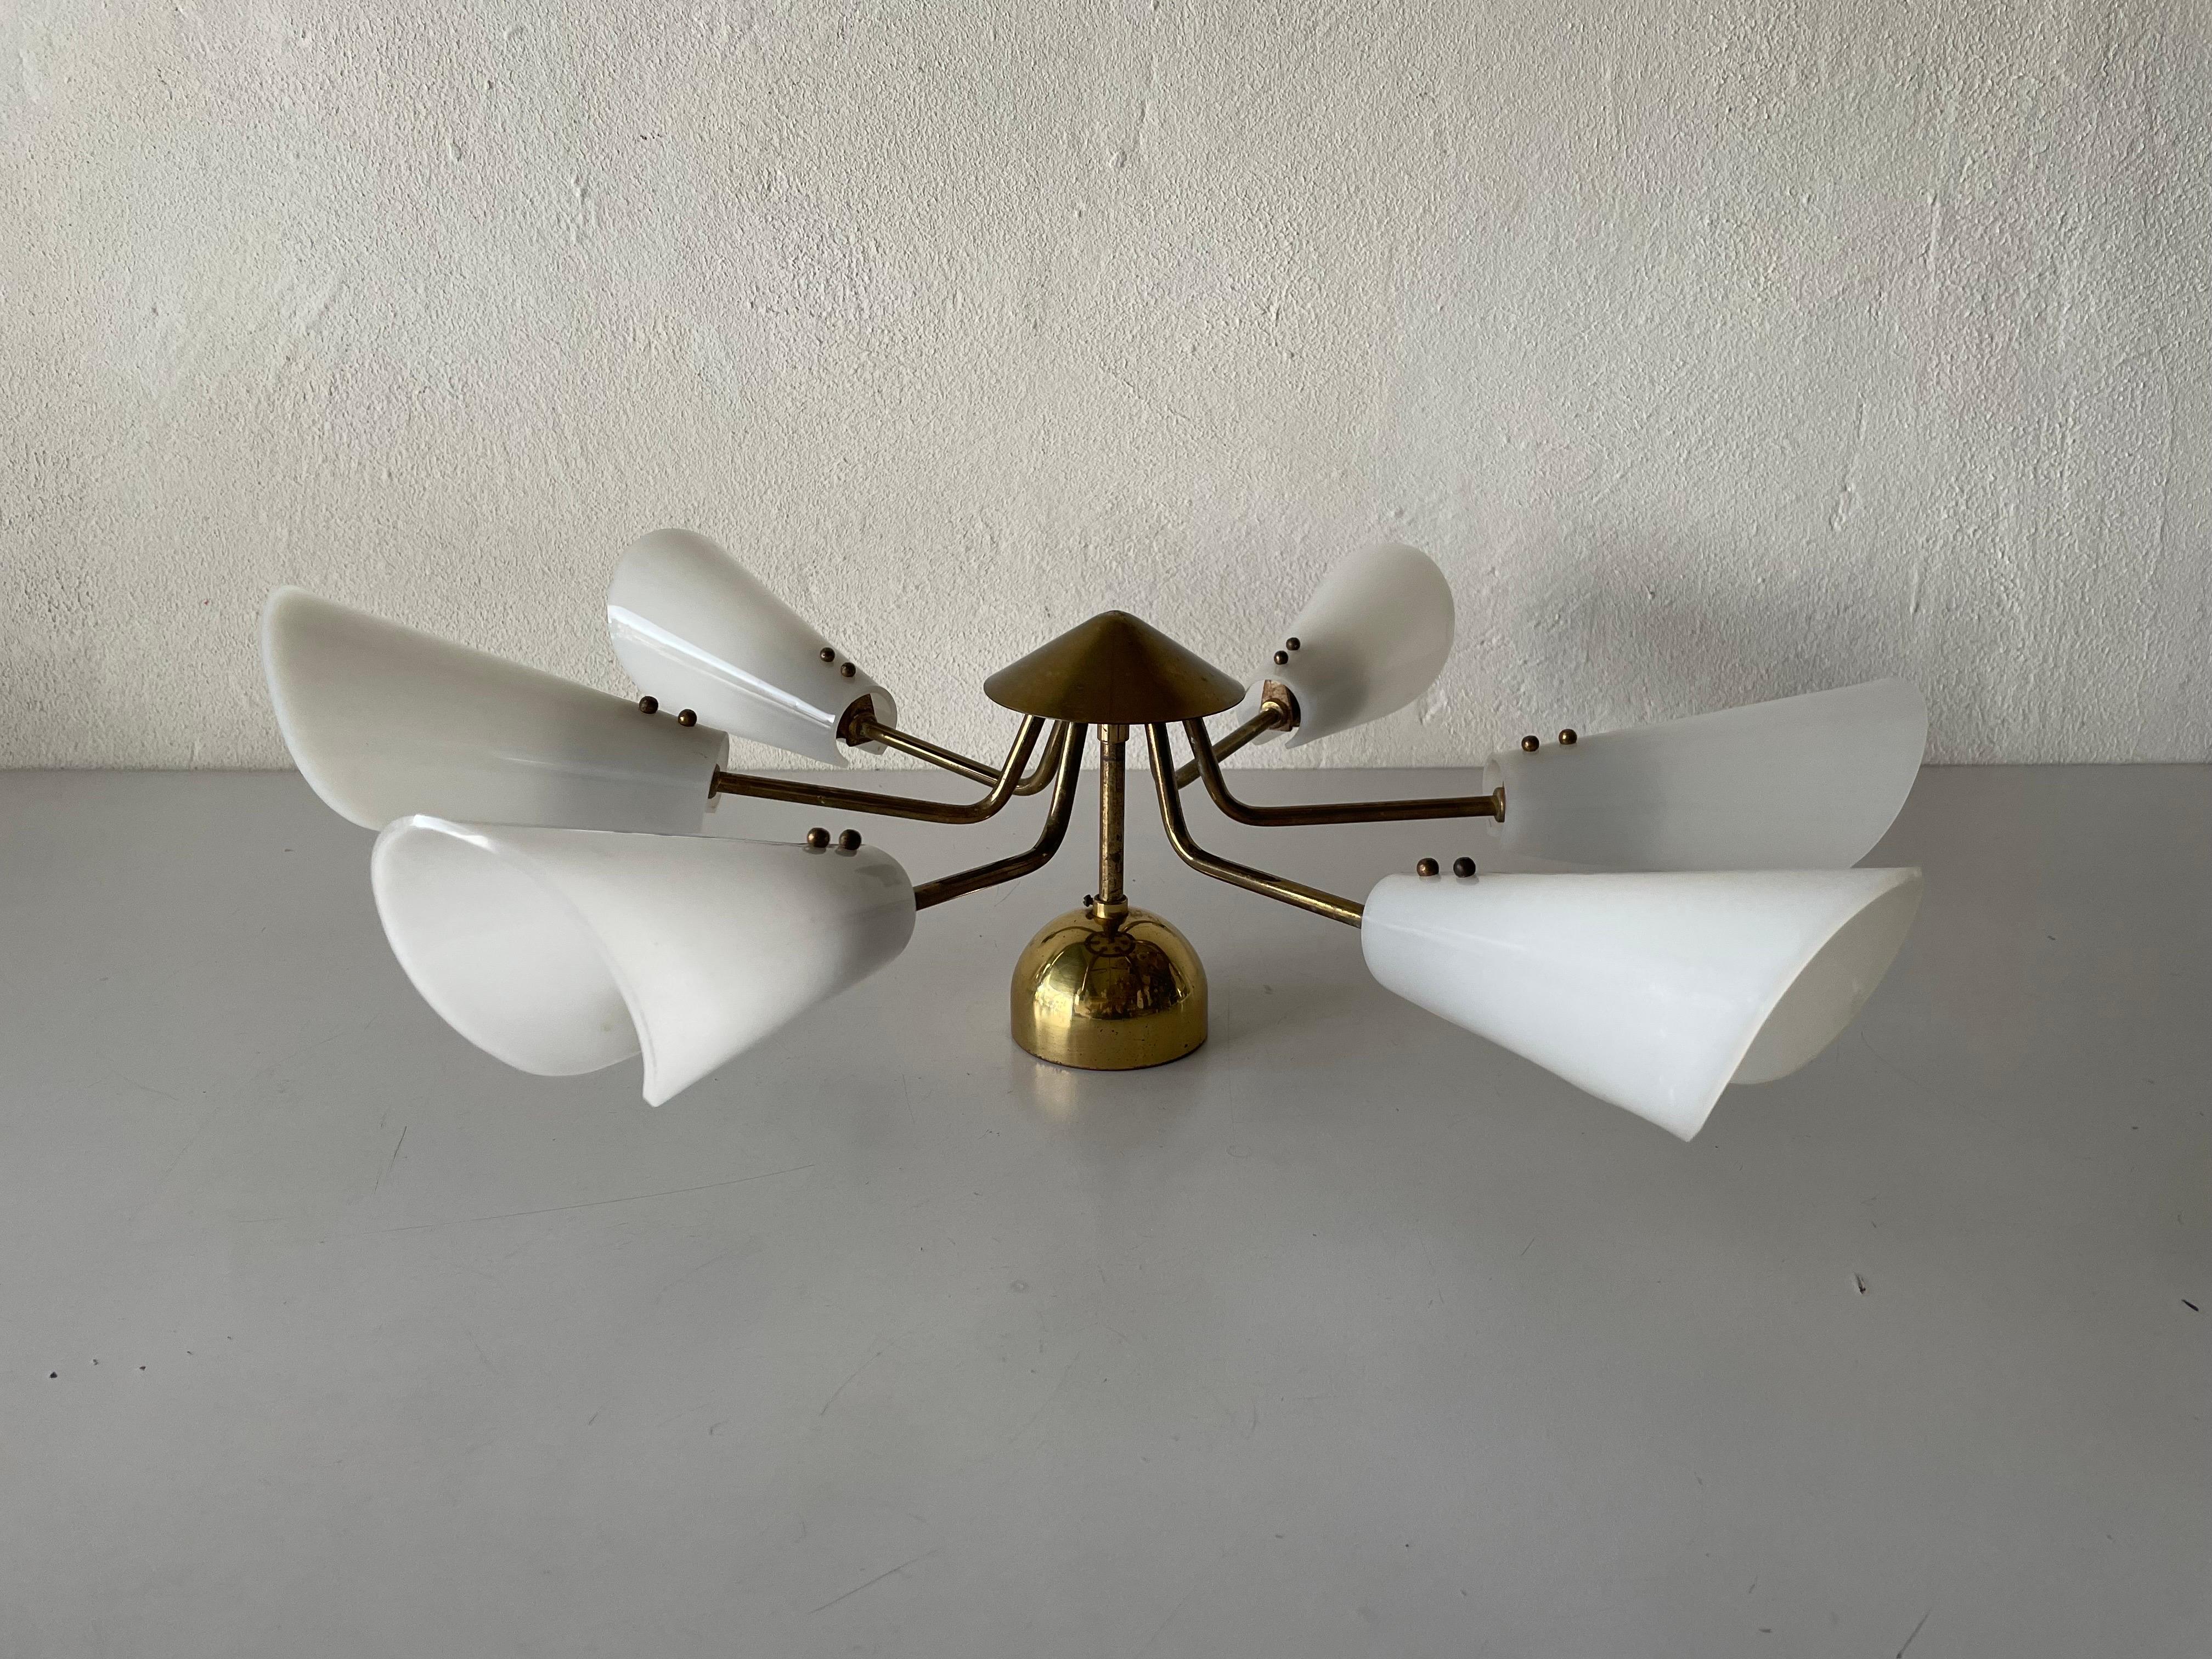 6-Armed metal sputnik ceiling light with plexiglass reflectors, 1960s, Germany.

Lampshade is in good condition and very clean. 

This lamp works with 6x E14 light bulbs. 
Wired and suitable to use with 220V and 110V for all